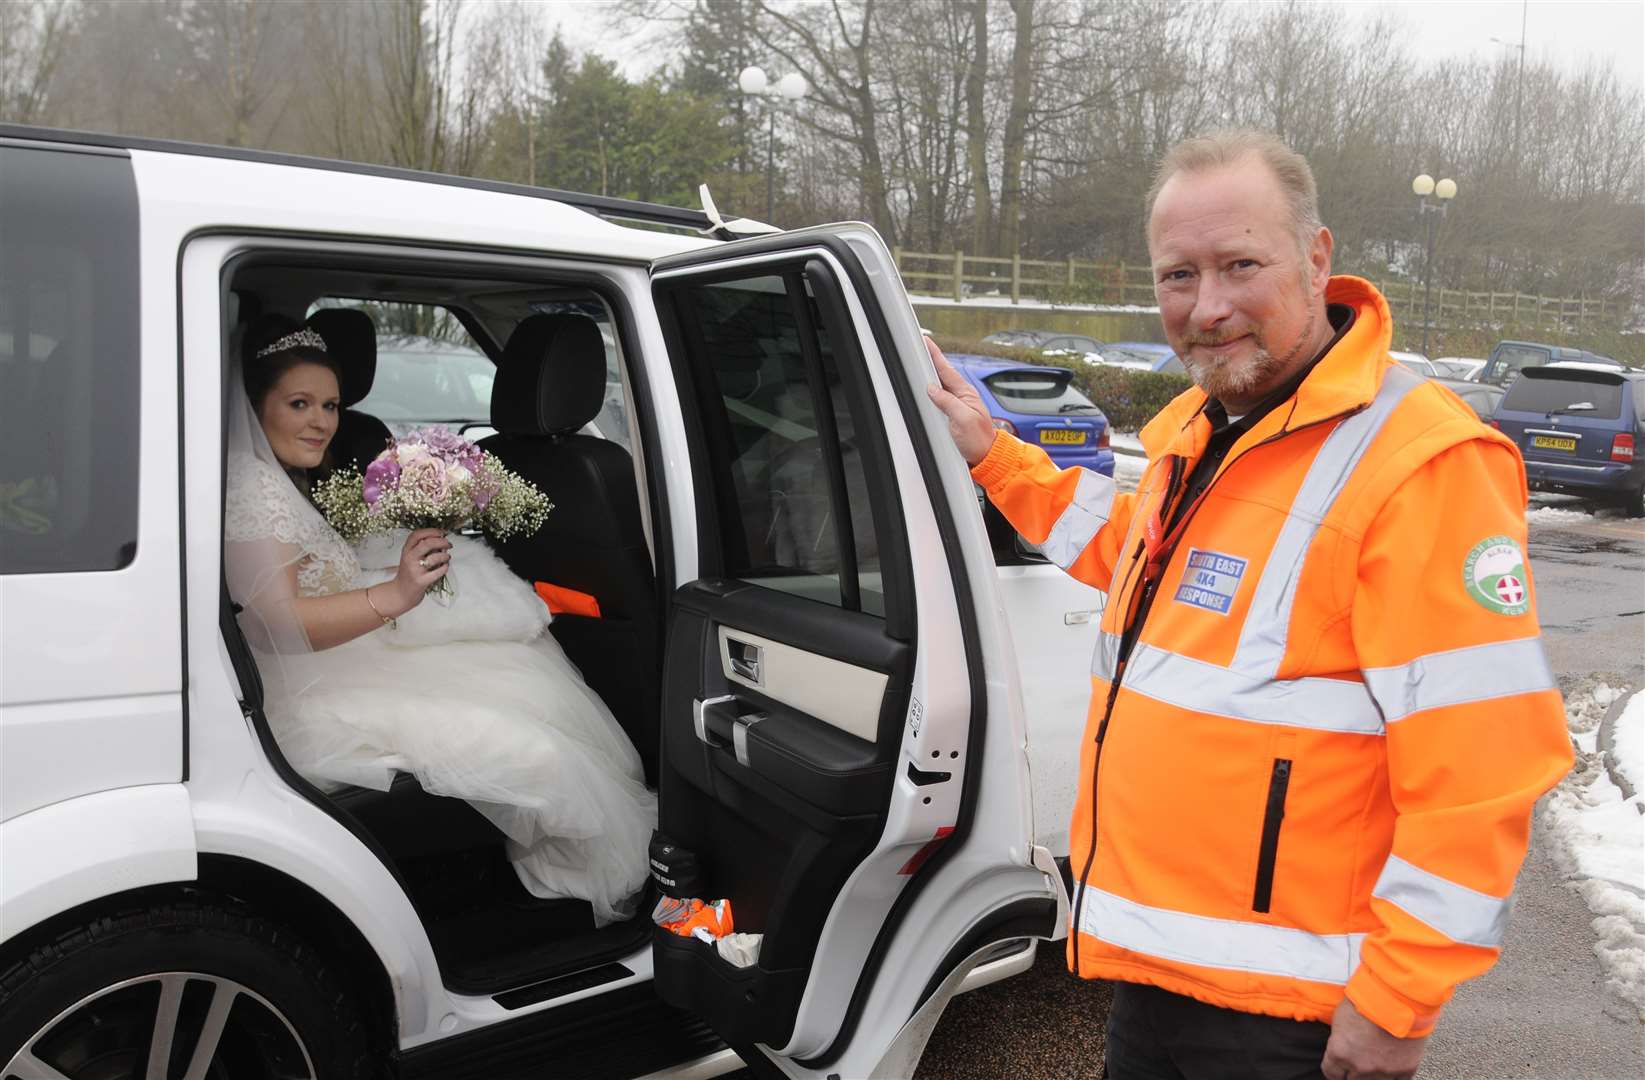 South East 4x4 Response stepped in to help get Laura Fillery to her wedding during icy weather in 2018